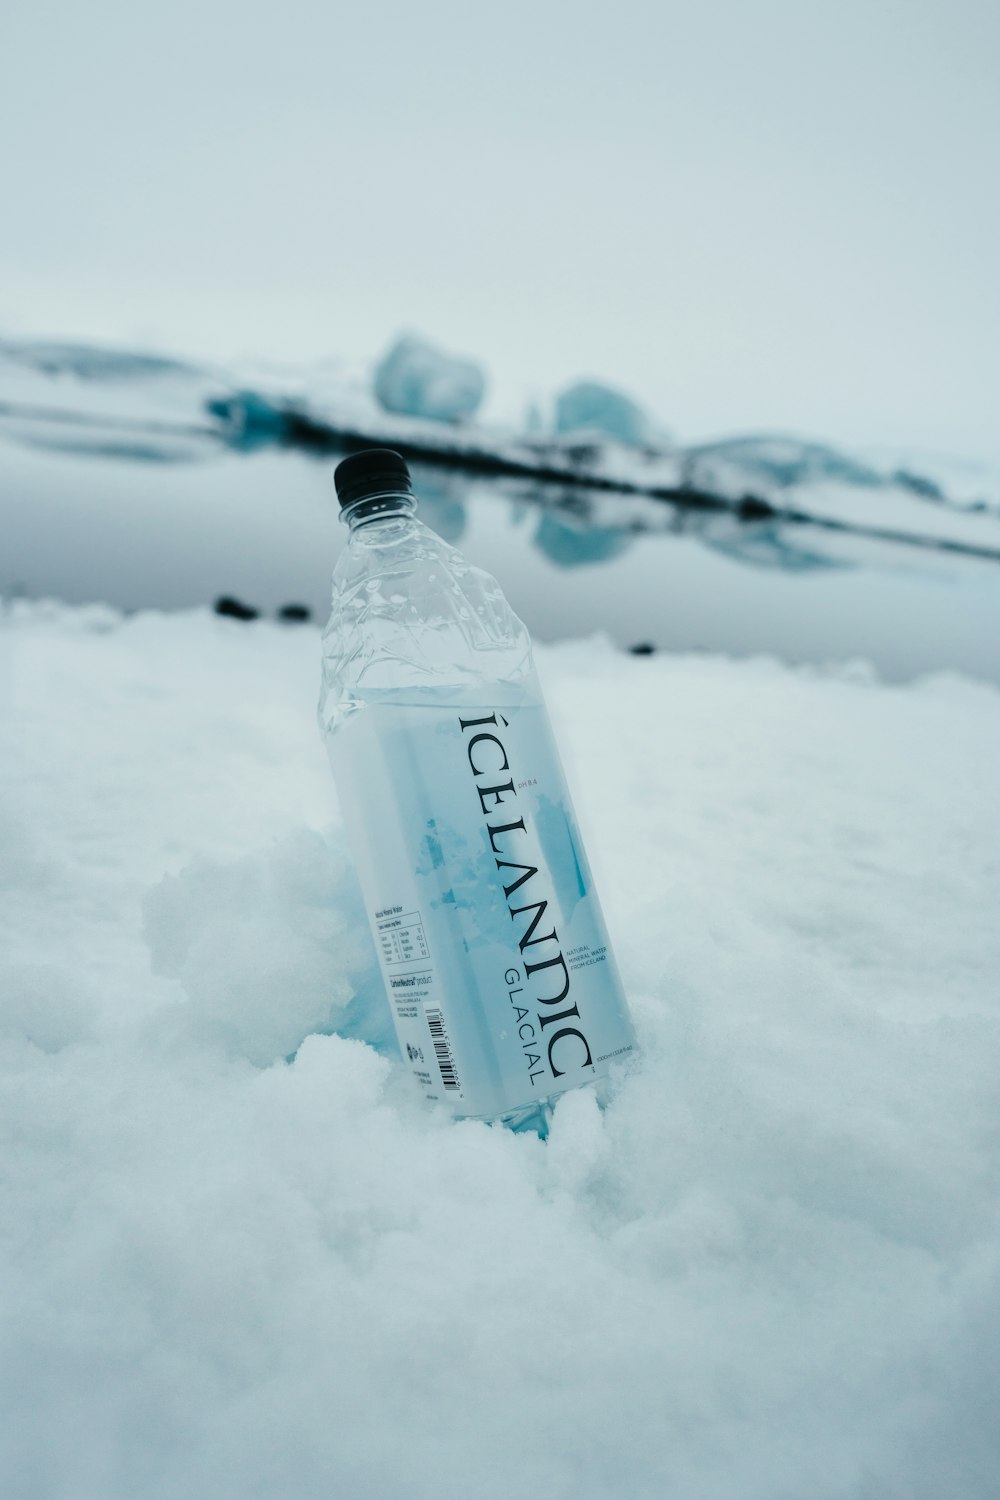 clear glass bottle on snow covered ground